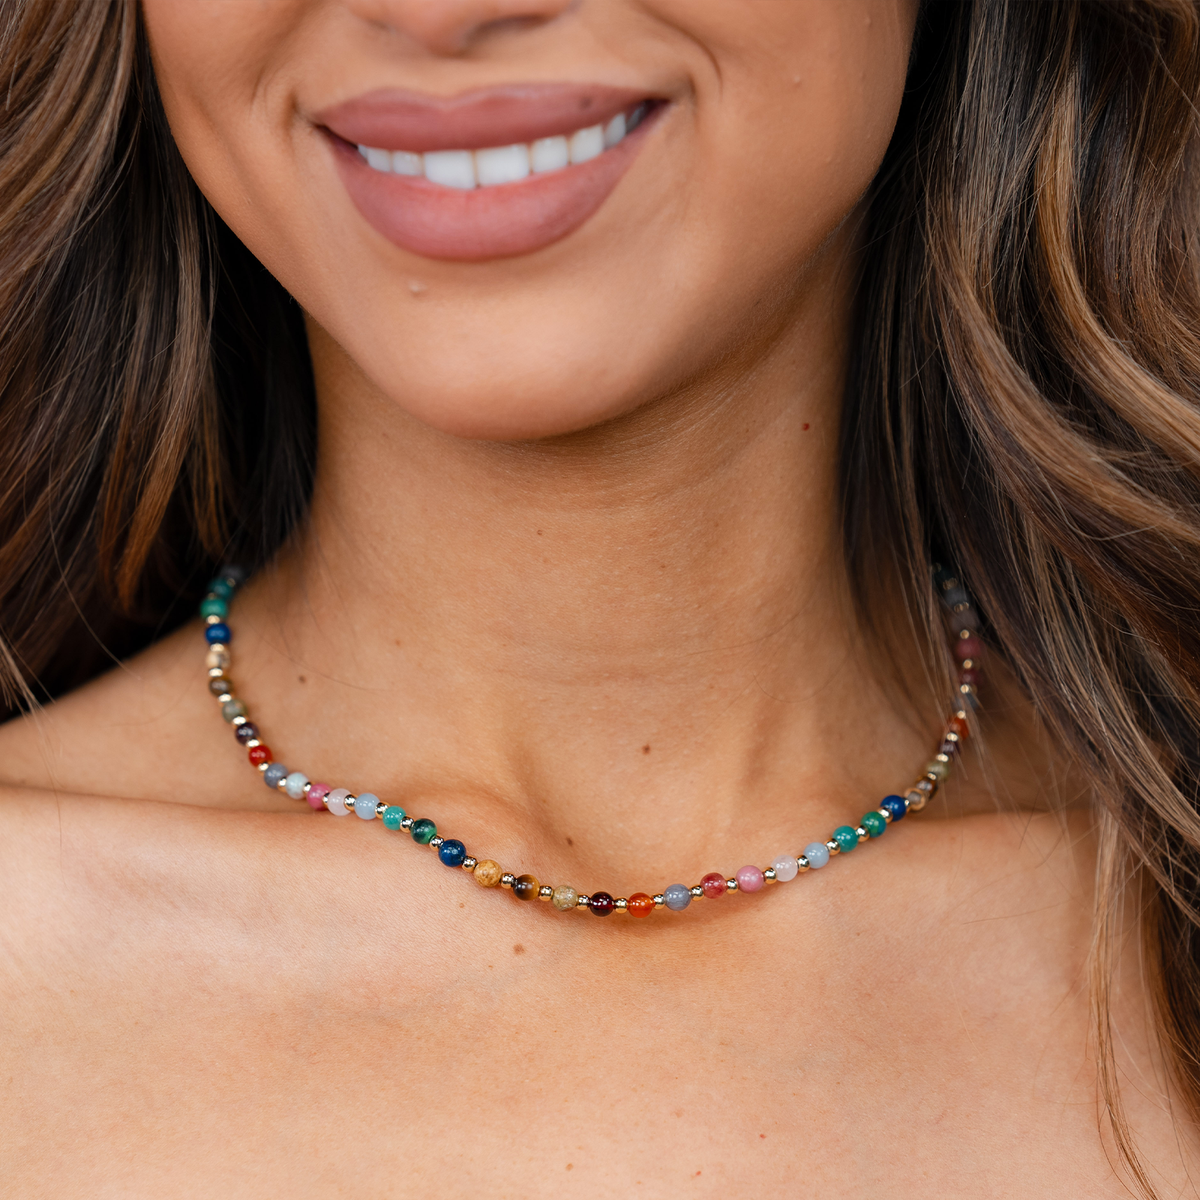 Model wearing a 4mm multicolor stone and gold bead healing necklace